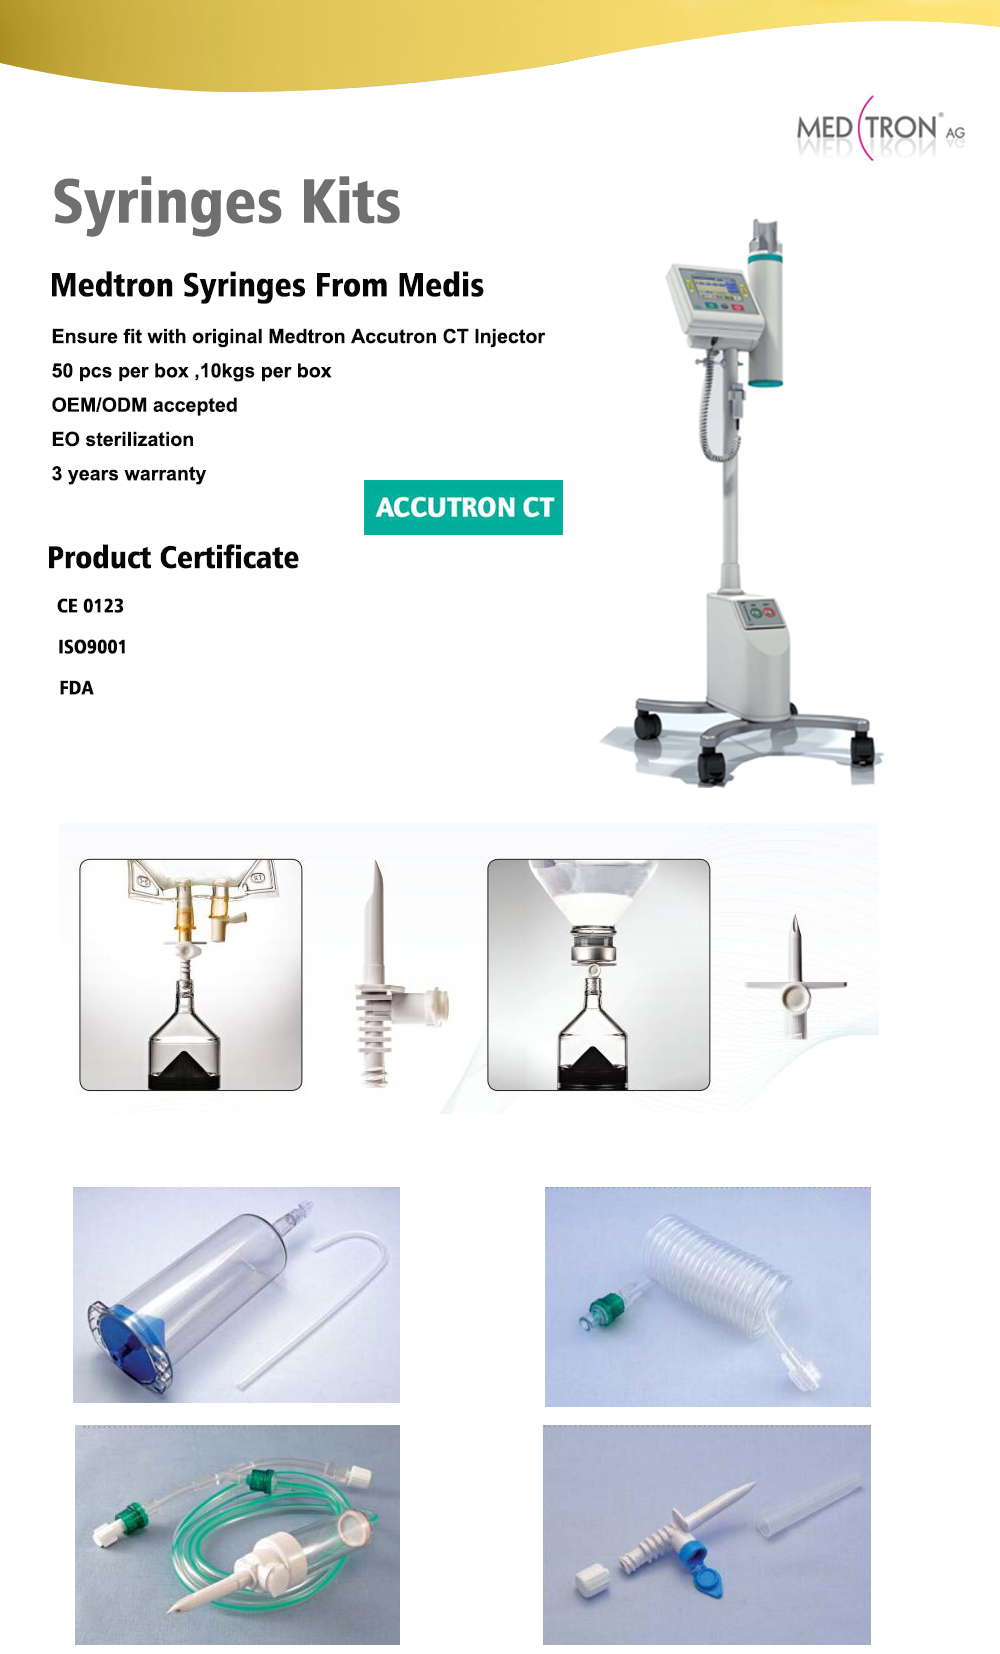 power injectors-medtron accutron ct injector-high pressure syringes-syringes without needle-ct injectors-contrast media injectors-syringes pack -prefilled syringes